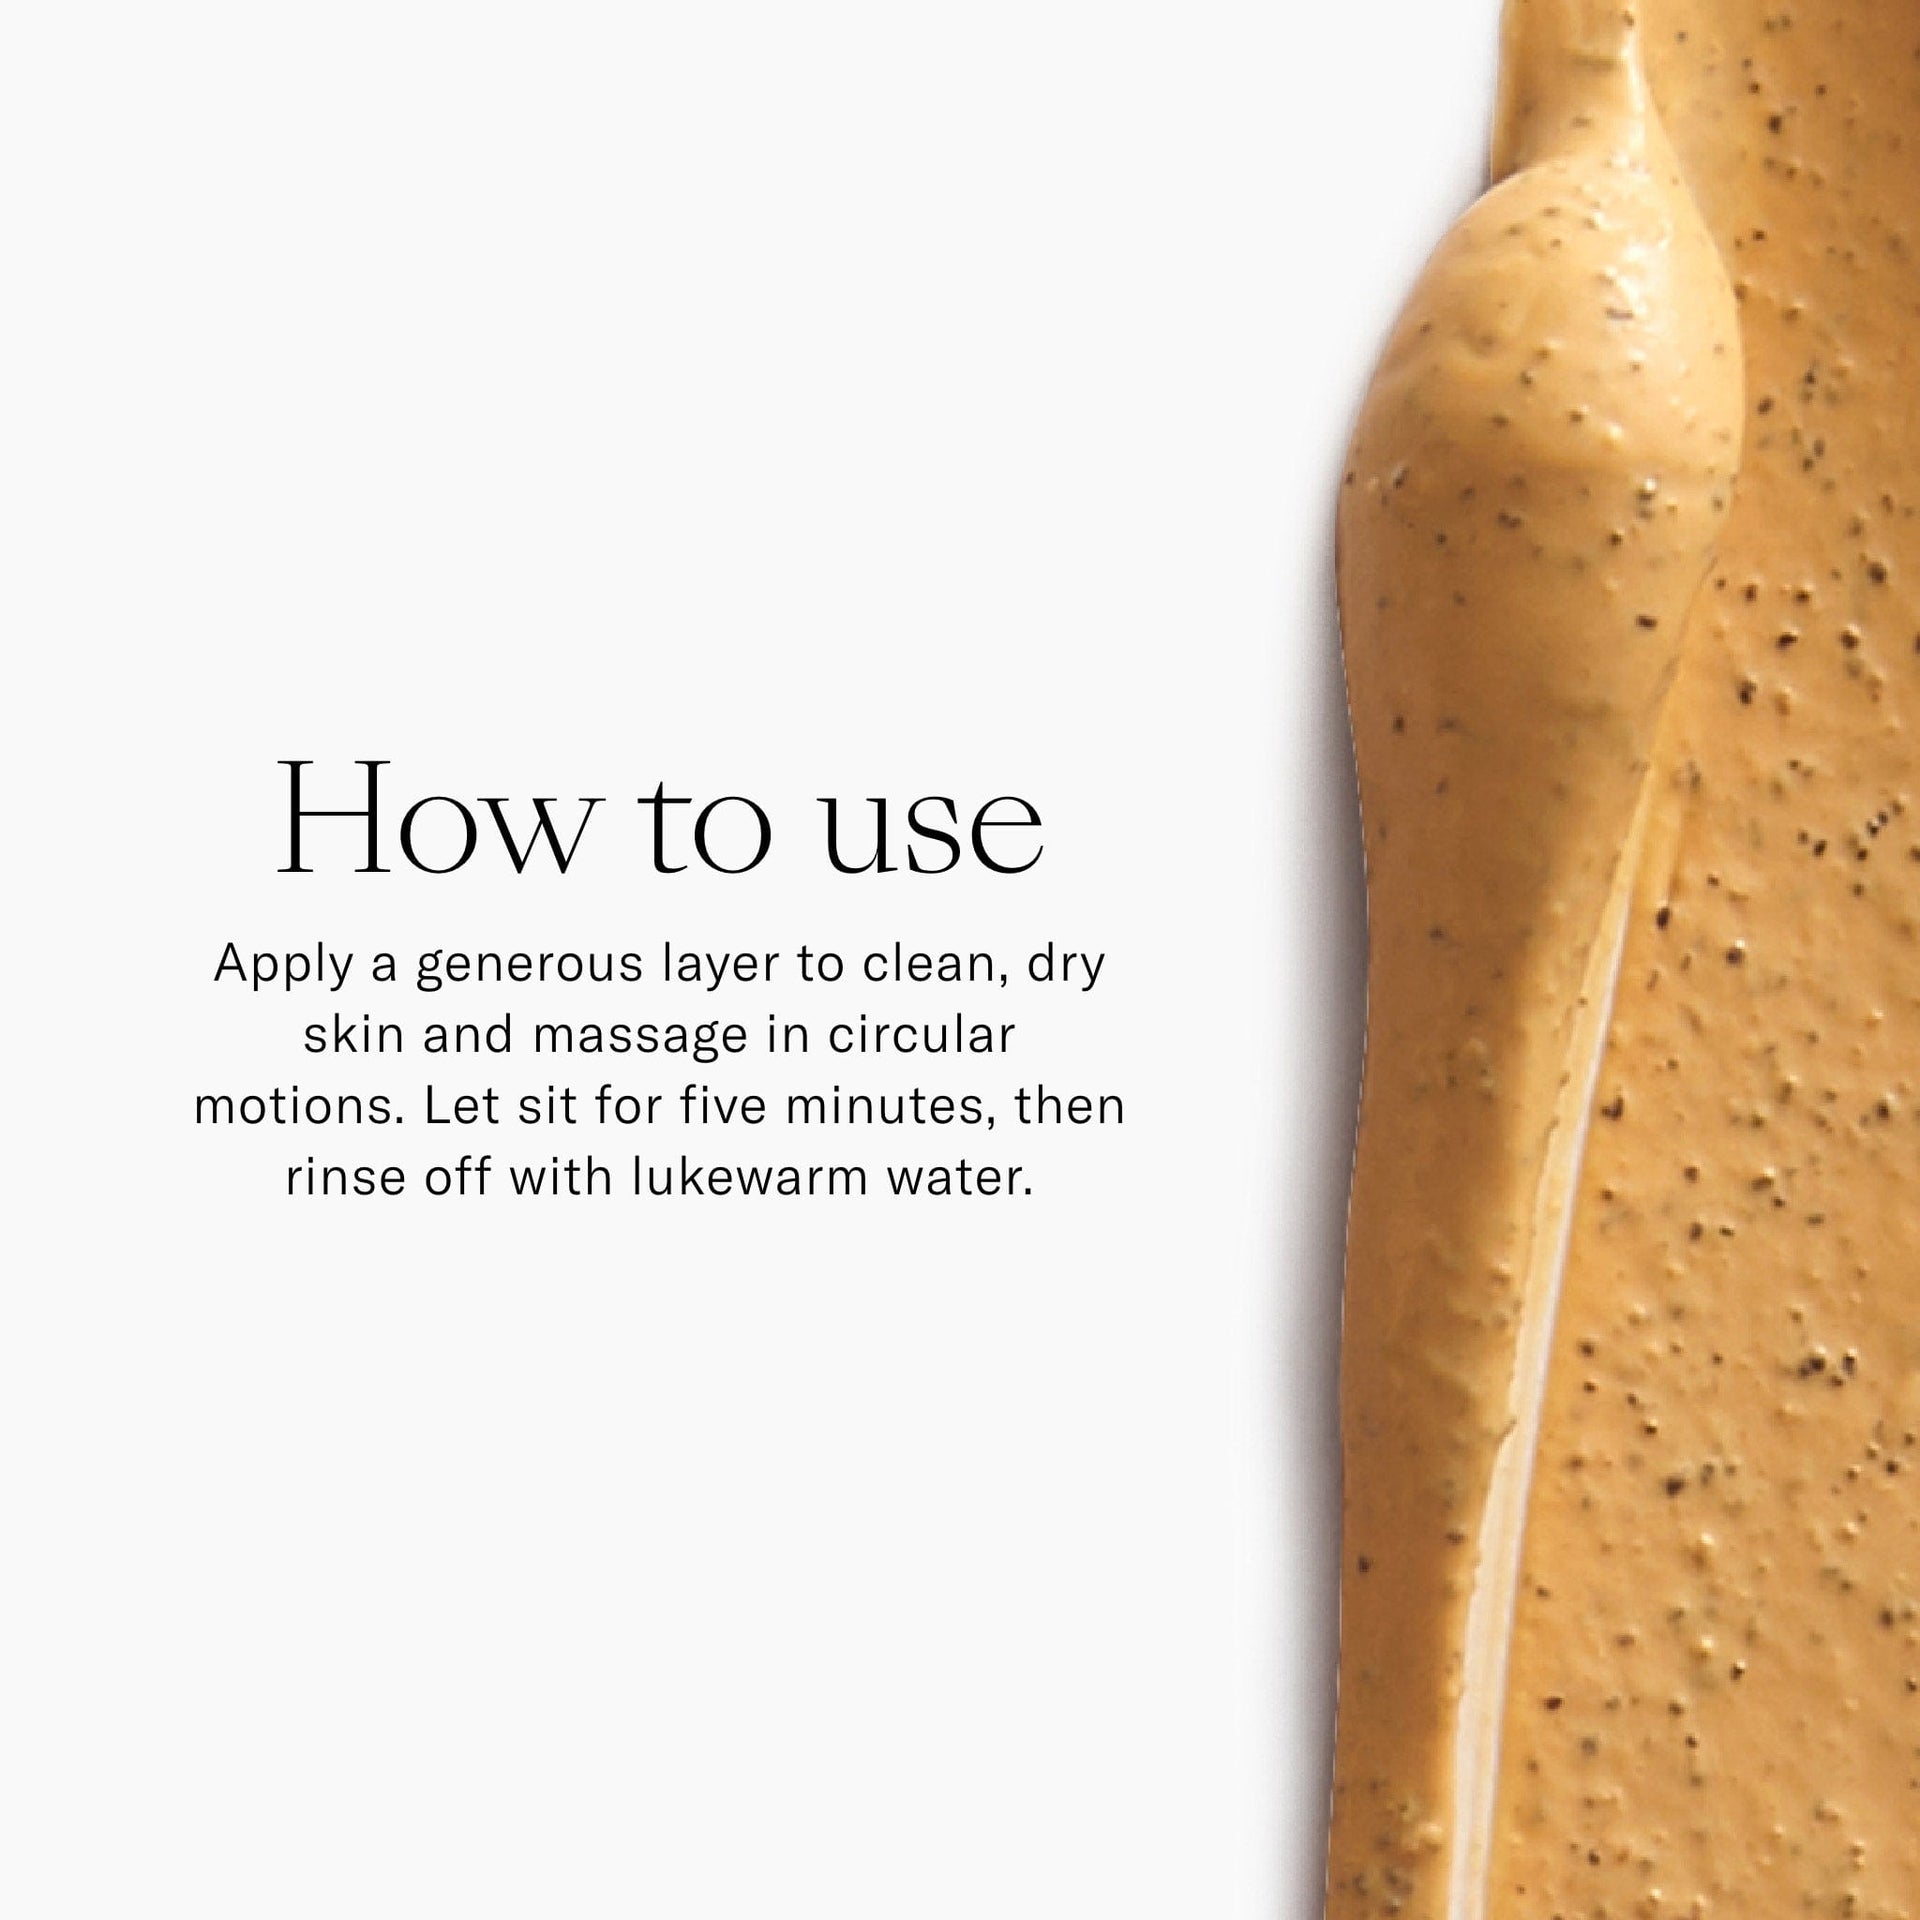 How to Use. Apply a generous layer to clean, dry skin and massage in circular motions. Let sit for five minutes then rinse off with lukewarm water. 